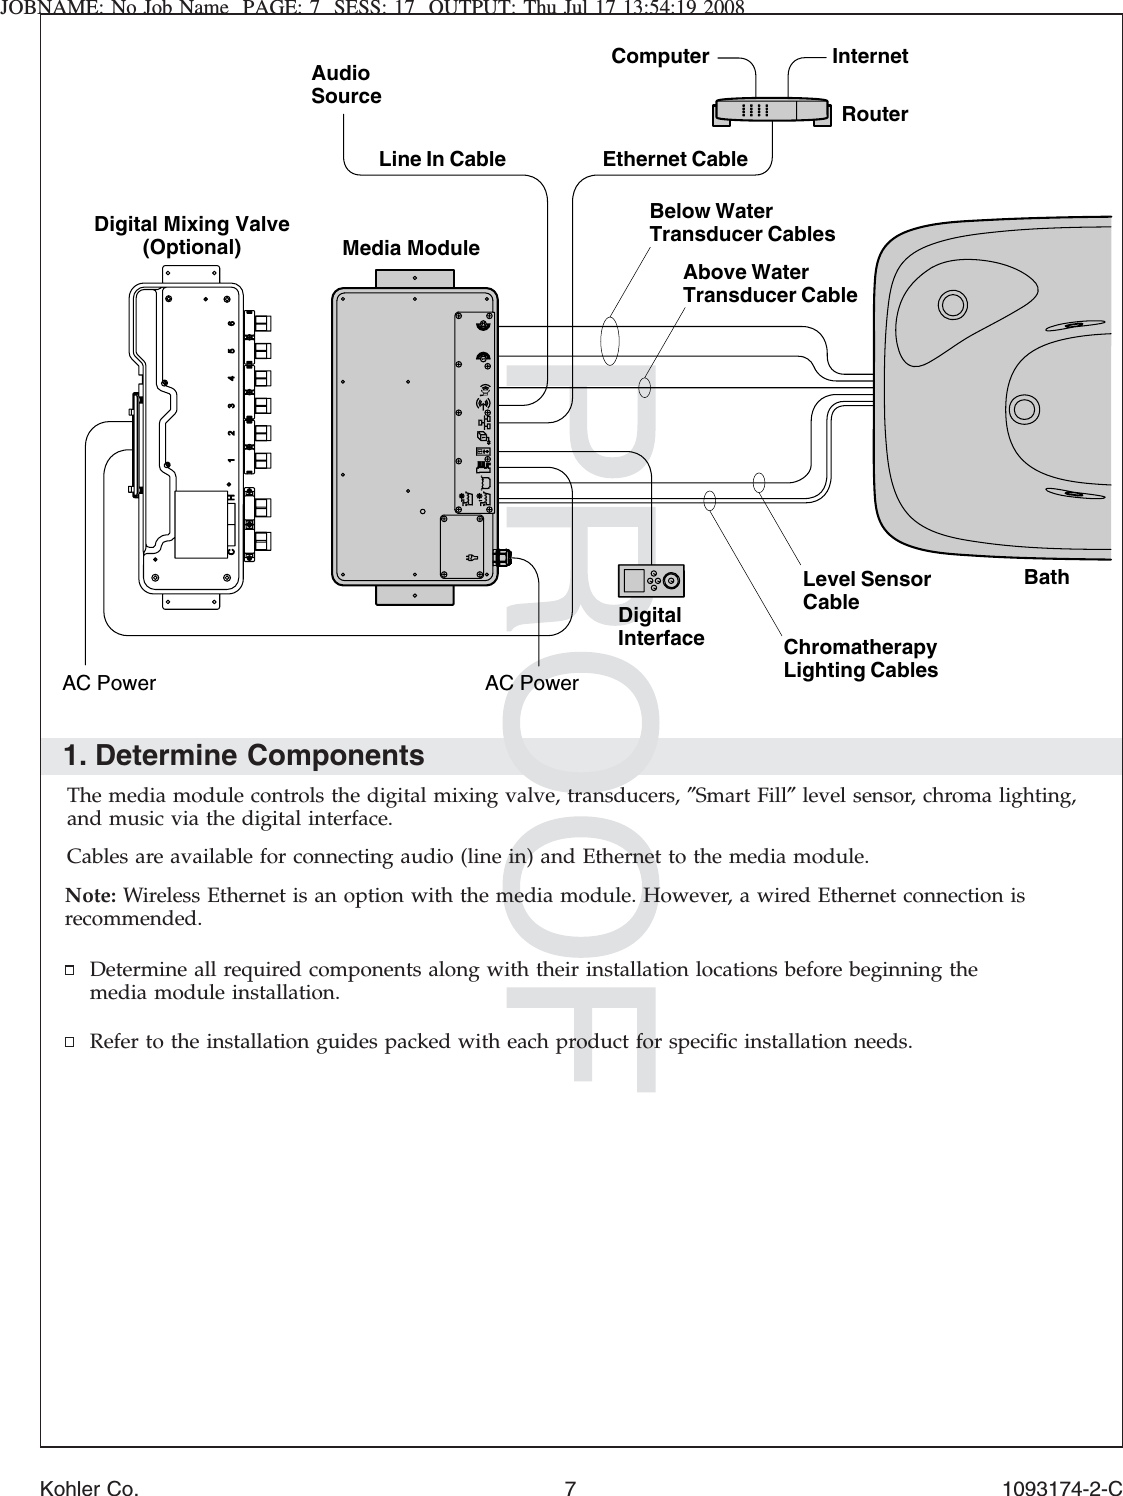 JOBNAME: No Job Name PAGE: 7 SESS: 17 OUTPUT: Thu Jul 17 13:54:19 20081. Determine ComponentsThe media module controls the digital mixing valve, transducers, ″Smart Fill″level sensor, chroma lighting,and music via the digital interface.Cables are available for connecting audio (line in) and Ethernet to the media module.Note: Wireless Ethernet is an option with the media module. However, a wired Ethernet connection isrecommended.Determine all required components along with their installation locations before beginning themedia module installation.Refer to the installation guides packed with each product for speciﬁc installation needs.AC PowerMedia ModuleRouterComputer InternetAudio SourceEthernet CableLine In CableAC PowerBelow Water Transducer CablesAbove Water Transducer CableLevel Sensor CableChromatherapy Lighting CablesBathDigital InterfaceDigital Mixing Valve(Optional)Kohler Co. 7 1093174-2-C